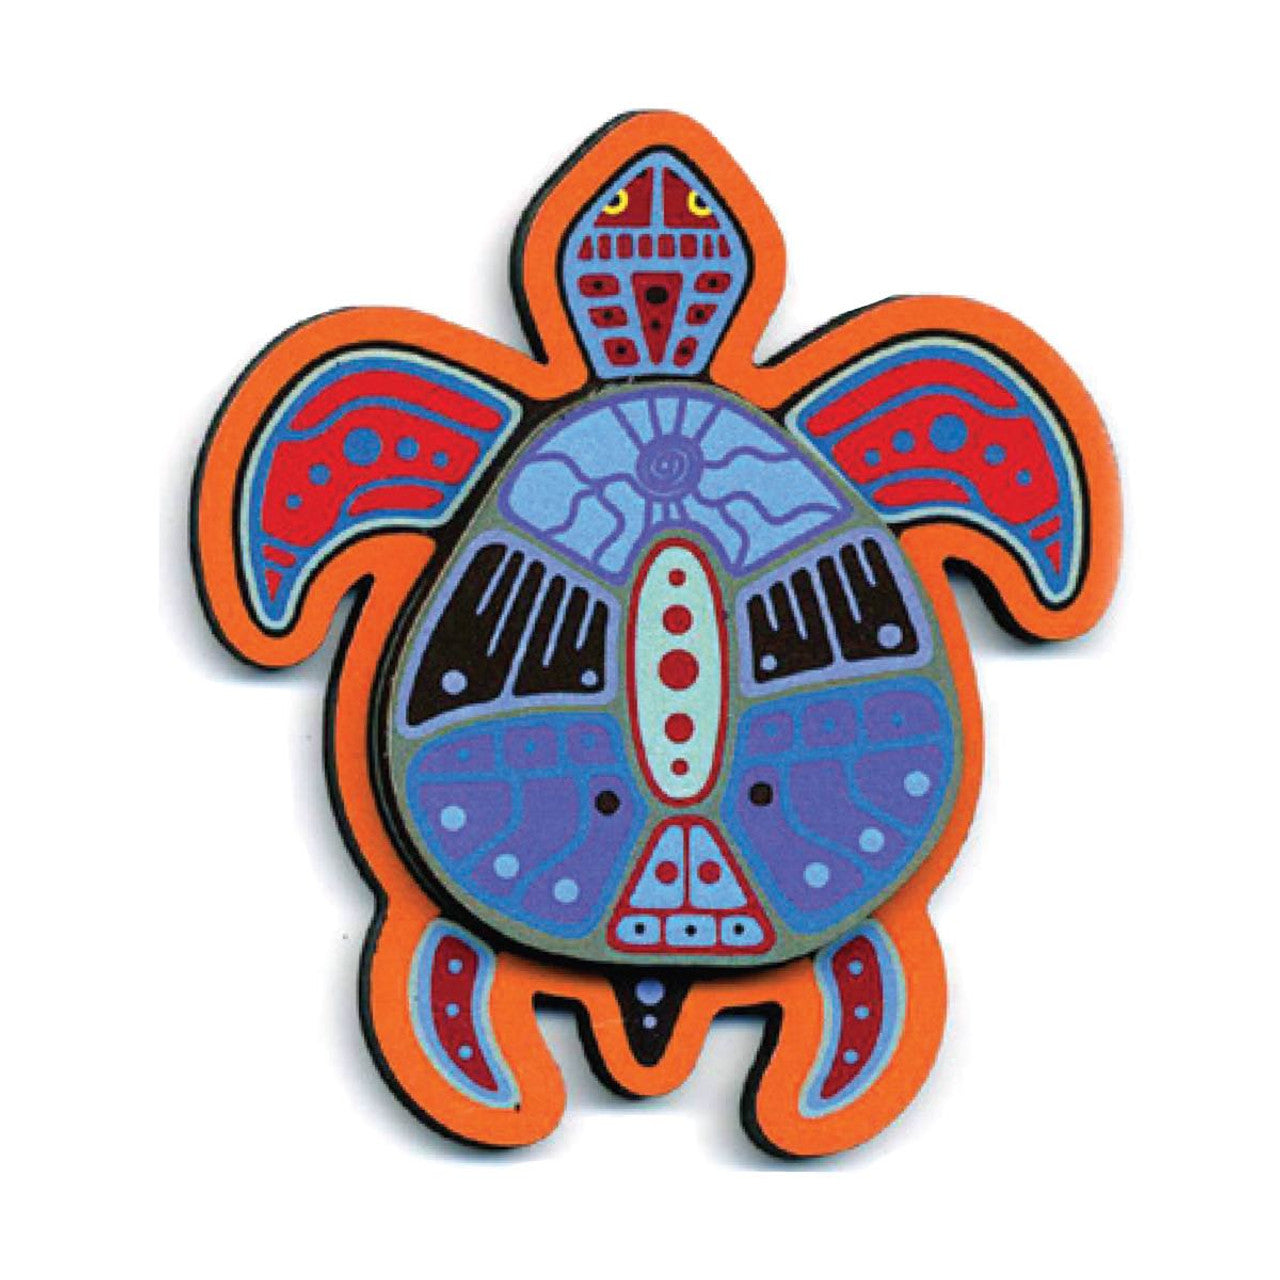 3D MAGNETS - Jason Adair Turtle - M330 - House of Himwitsa Native Art Gallery and Gifts